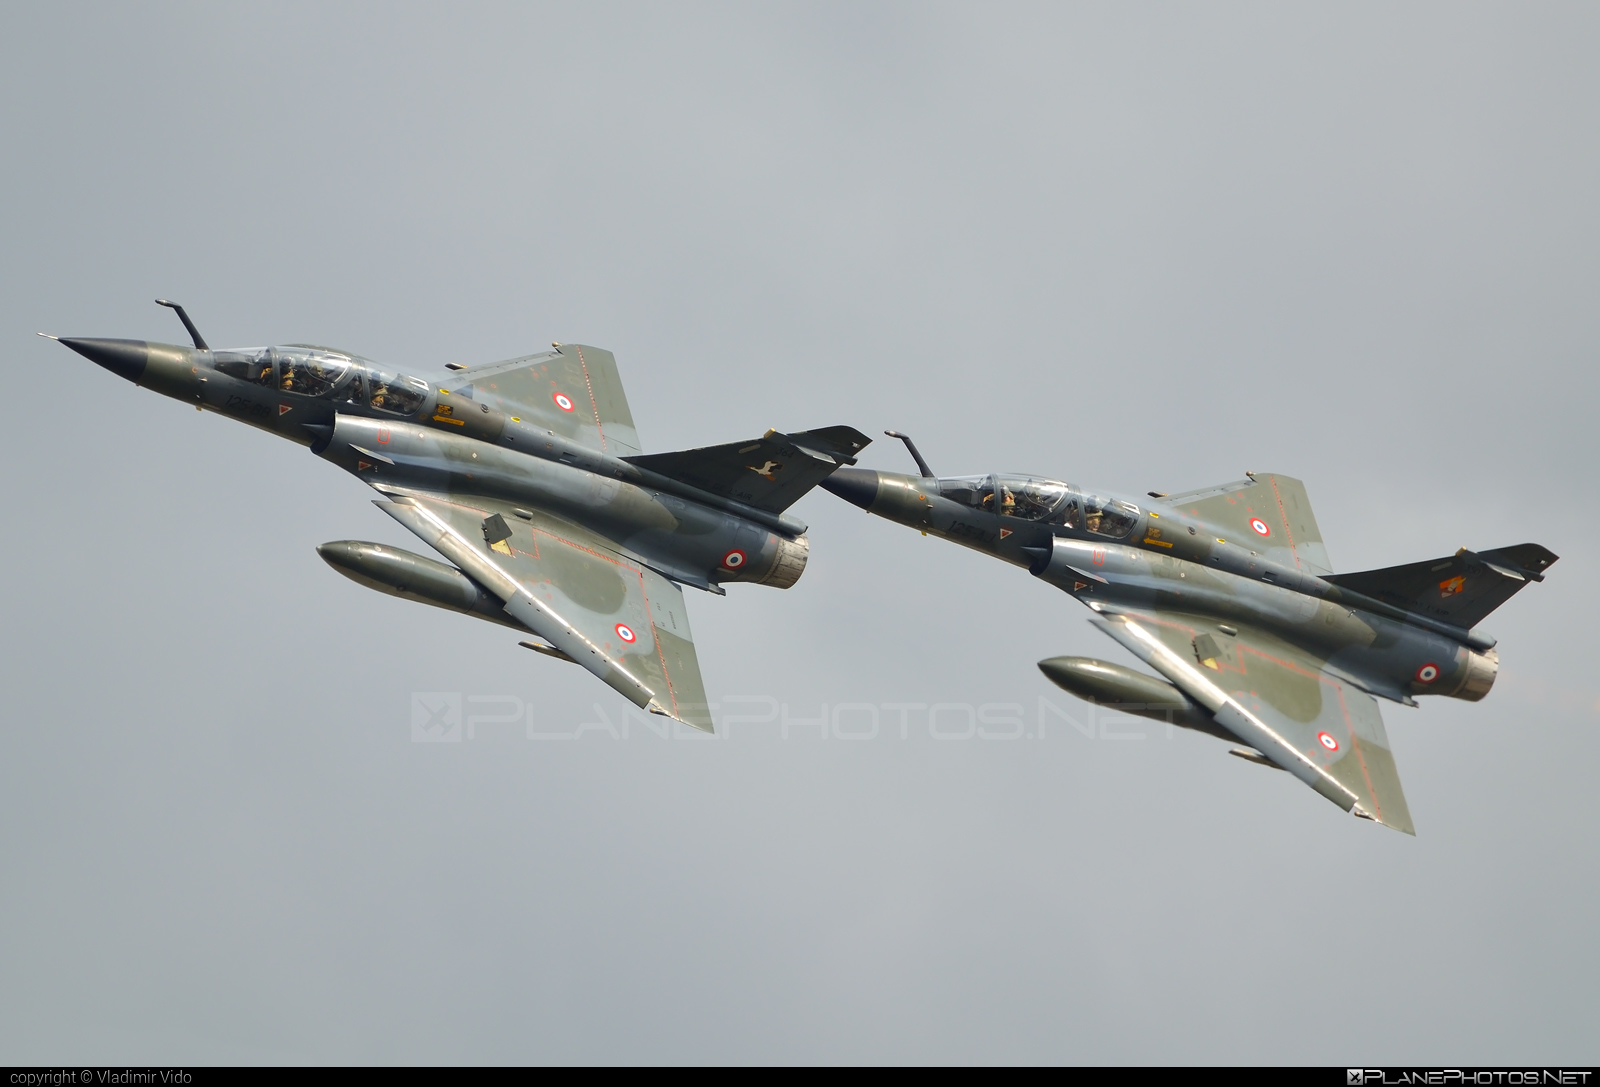 Dassault Mirage 2000N - 364 operated by Armée de l´Air (French Air Force) #DassaultMirage #DassaultMirage2000 #DassaultMirage2000n #armeedelair #dassault #frenchairforce #mirage #mirage2000 #mirage2000n #natodays #natodays2015